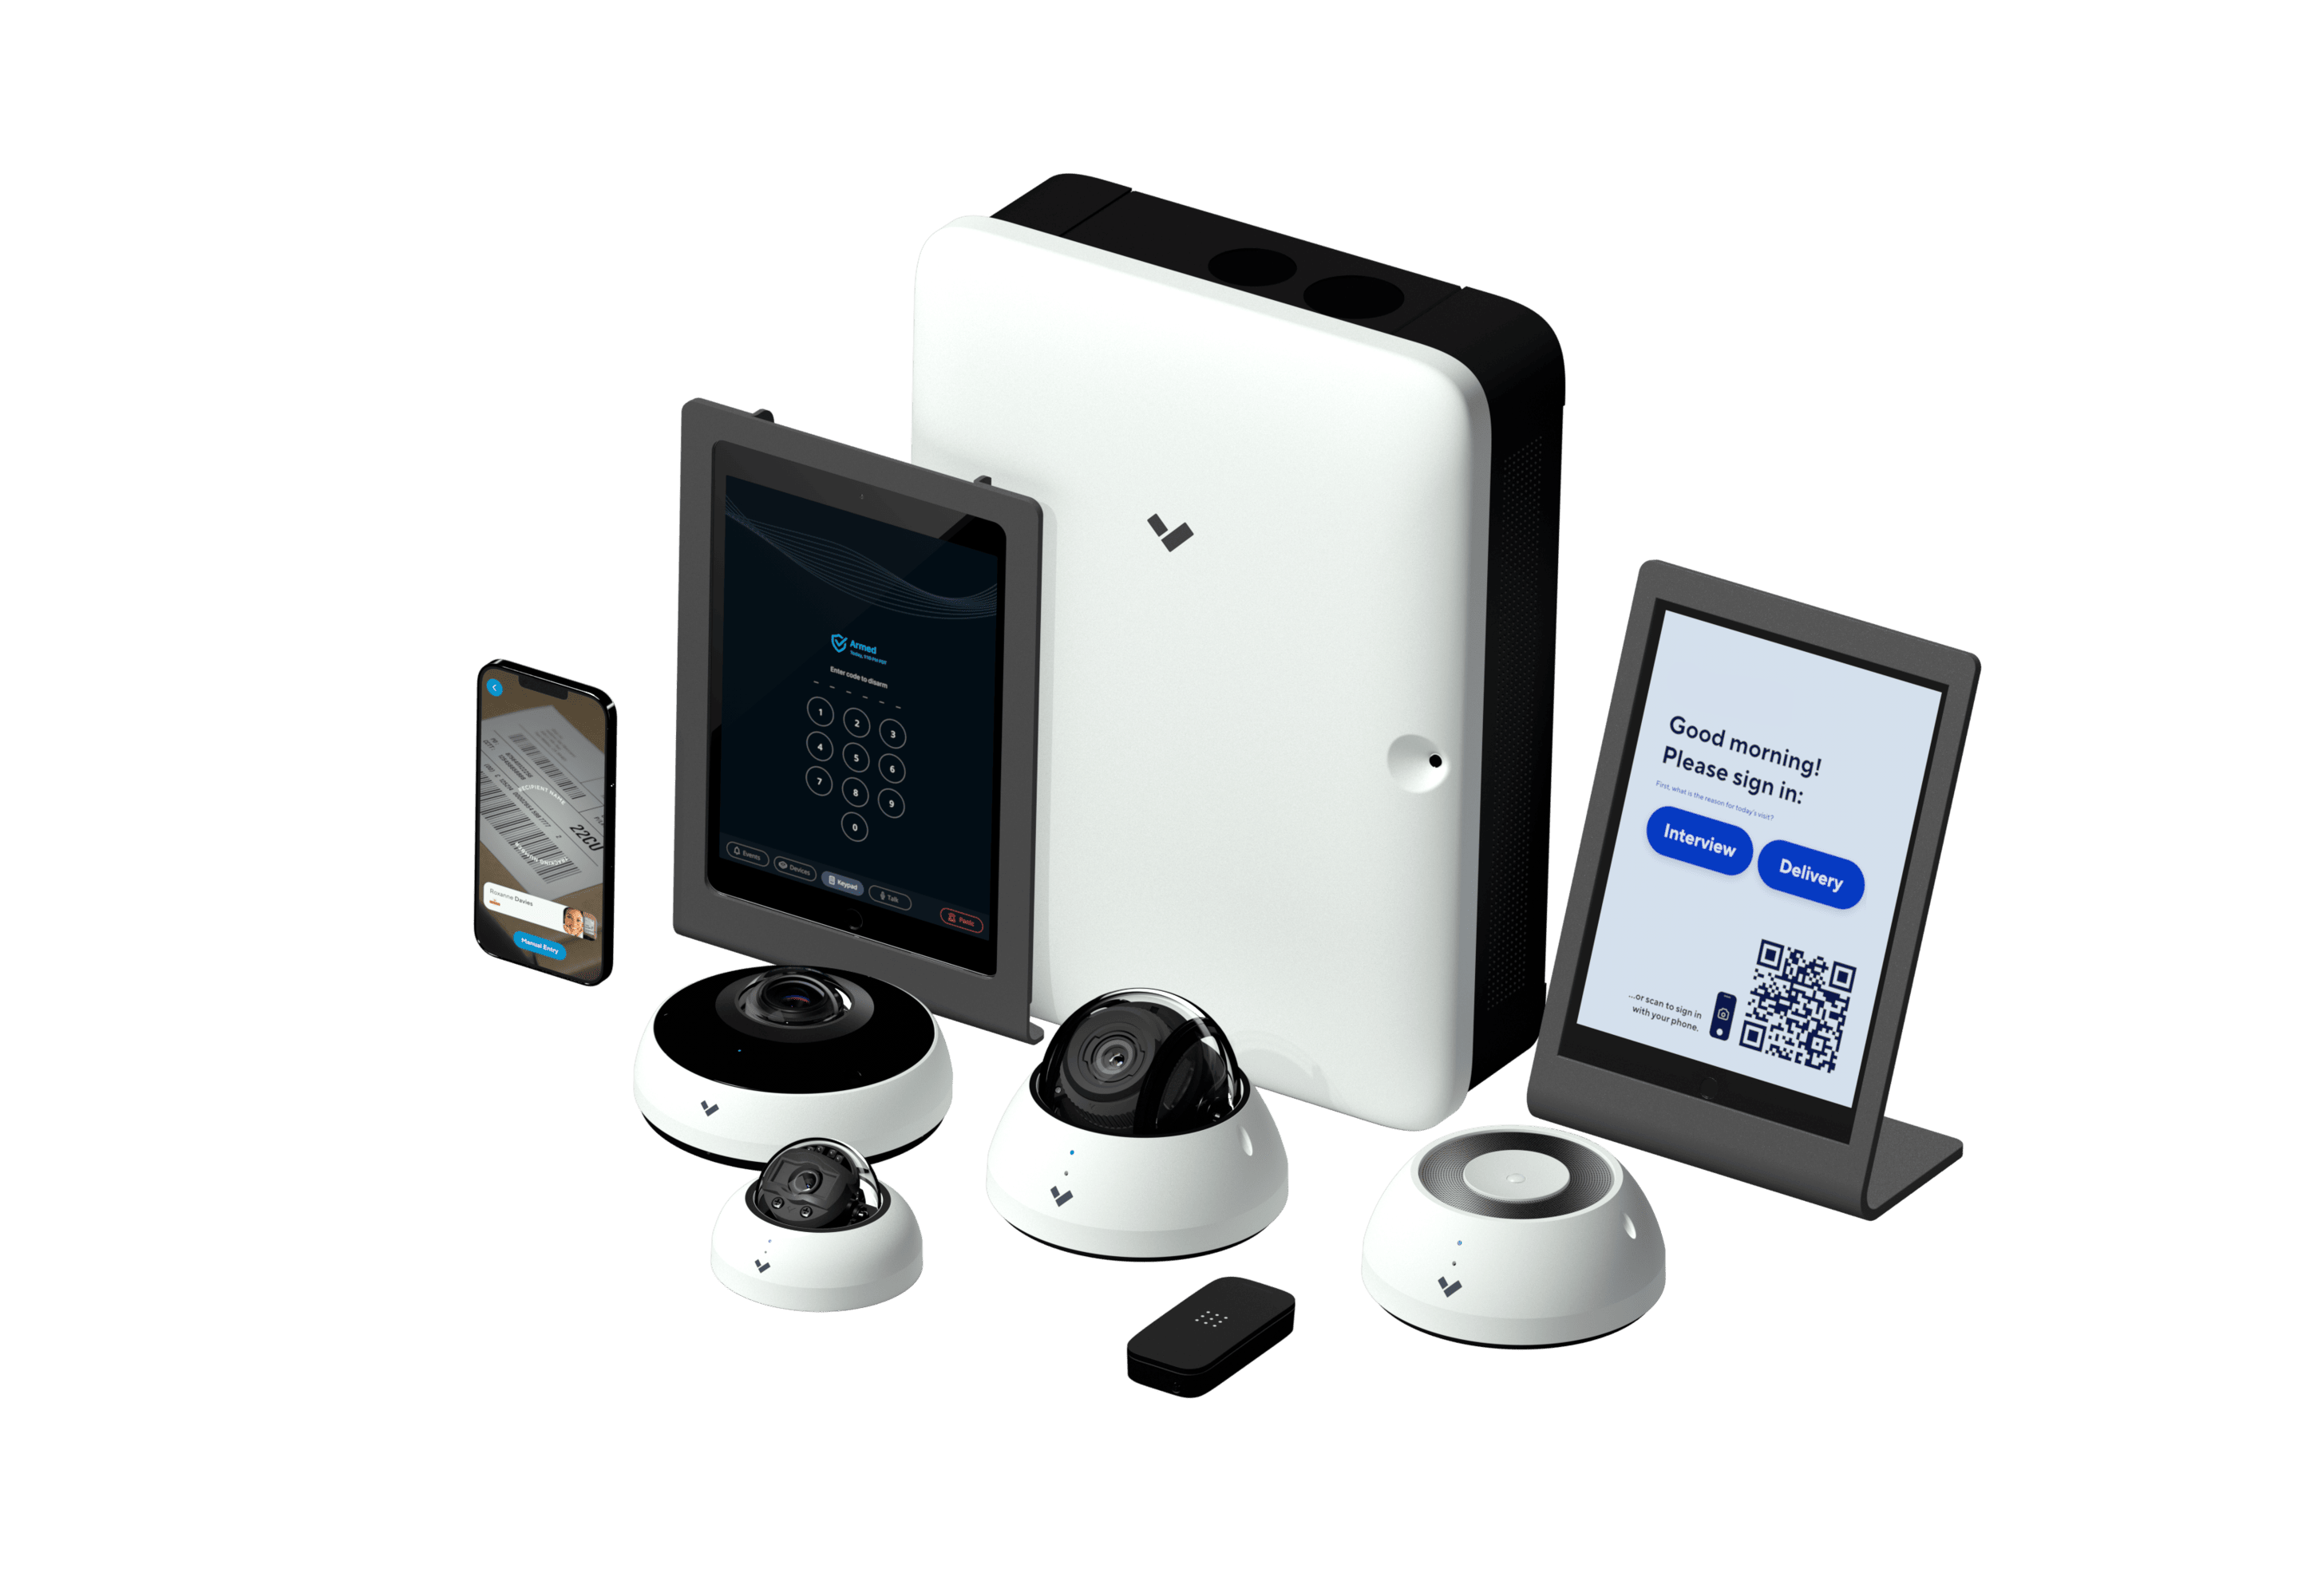 Shot of Verkada’s product family including the best surveillance cameras with AI, alarm system, door controller, guest management iPad, environmental sensors, and access control keypads